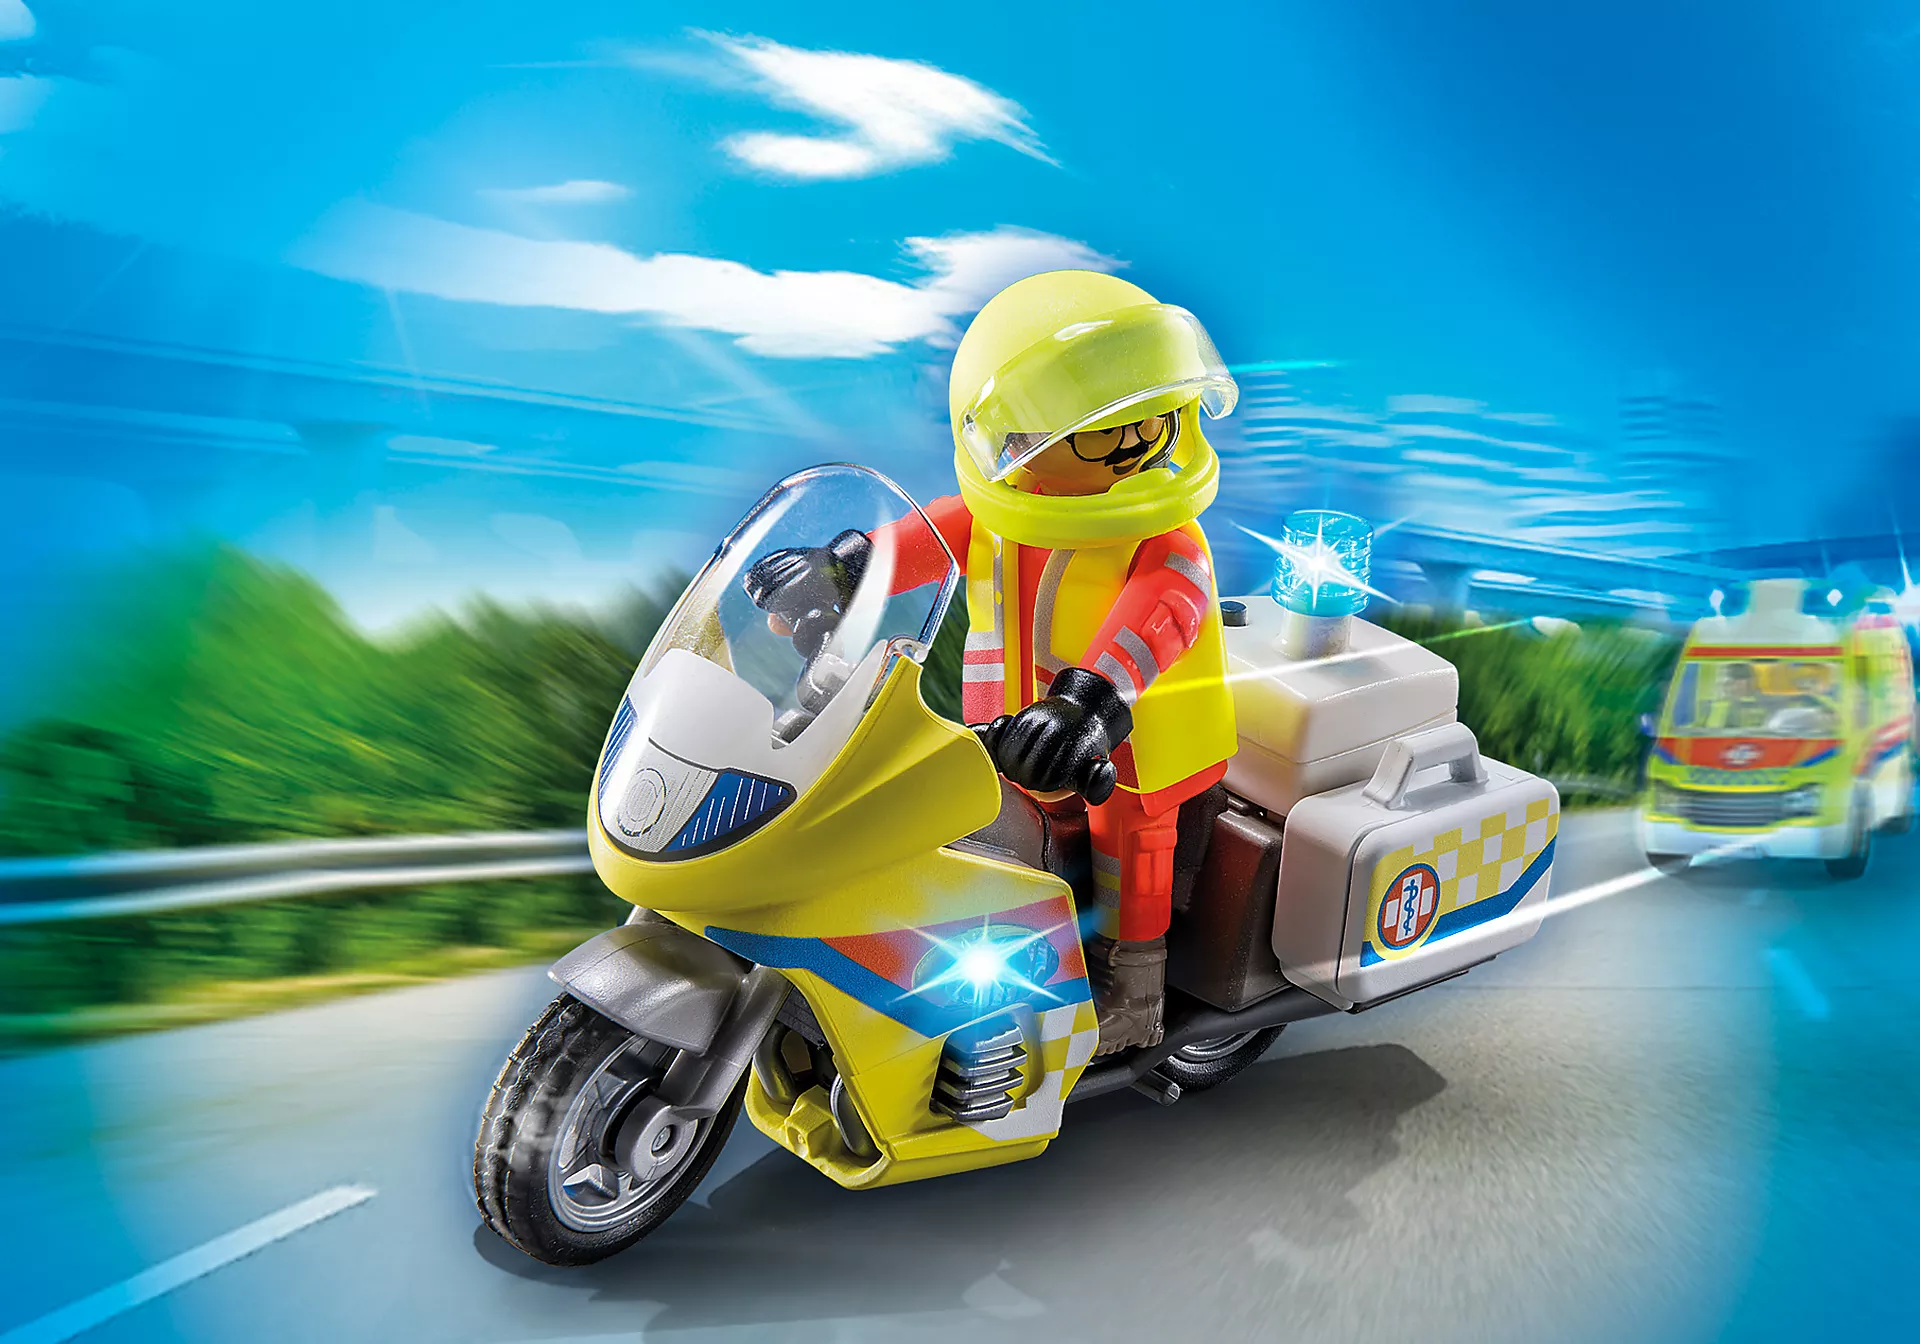 rescue-motorcycle-with-flashing-light.webp